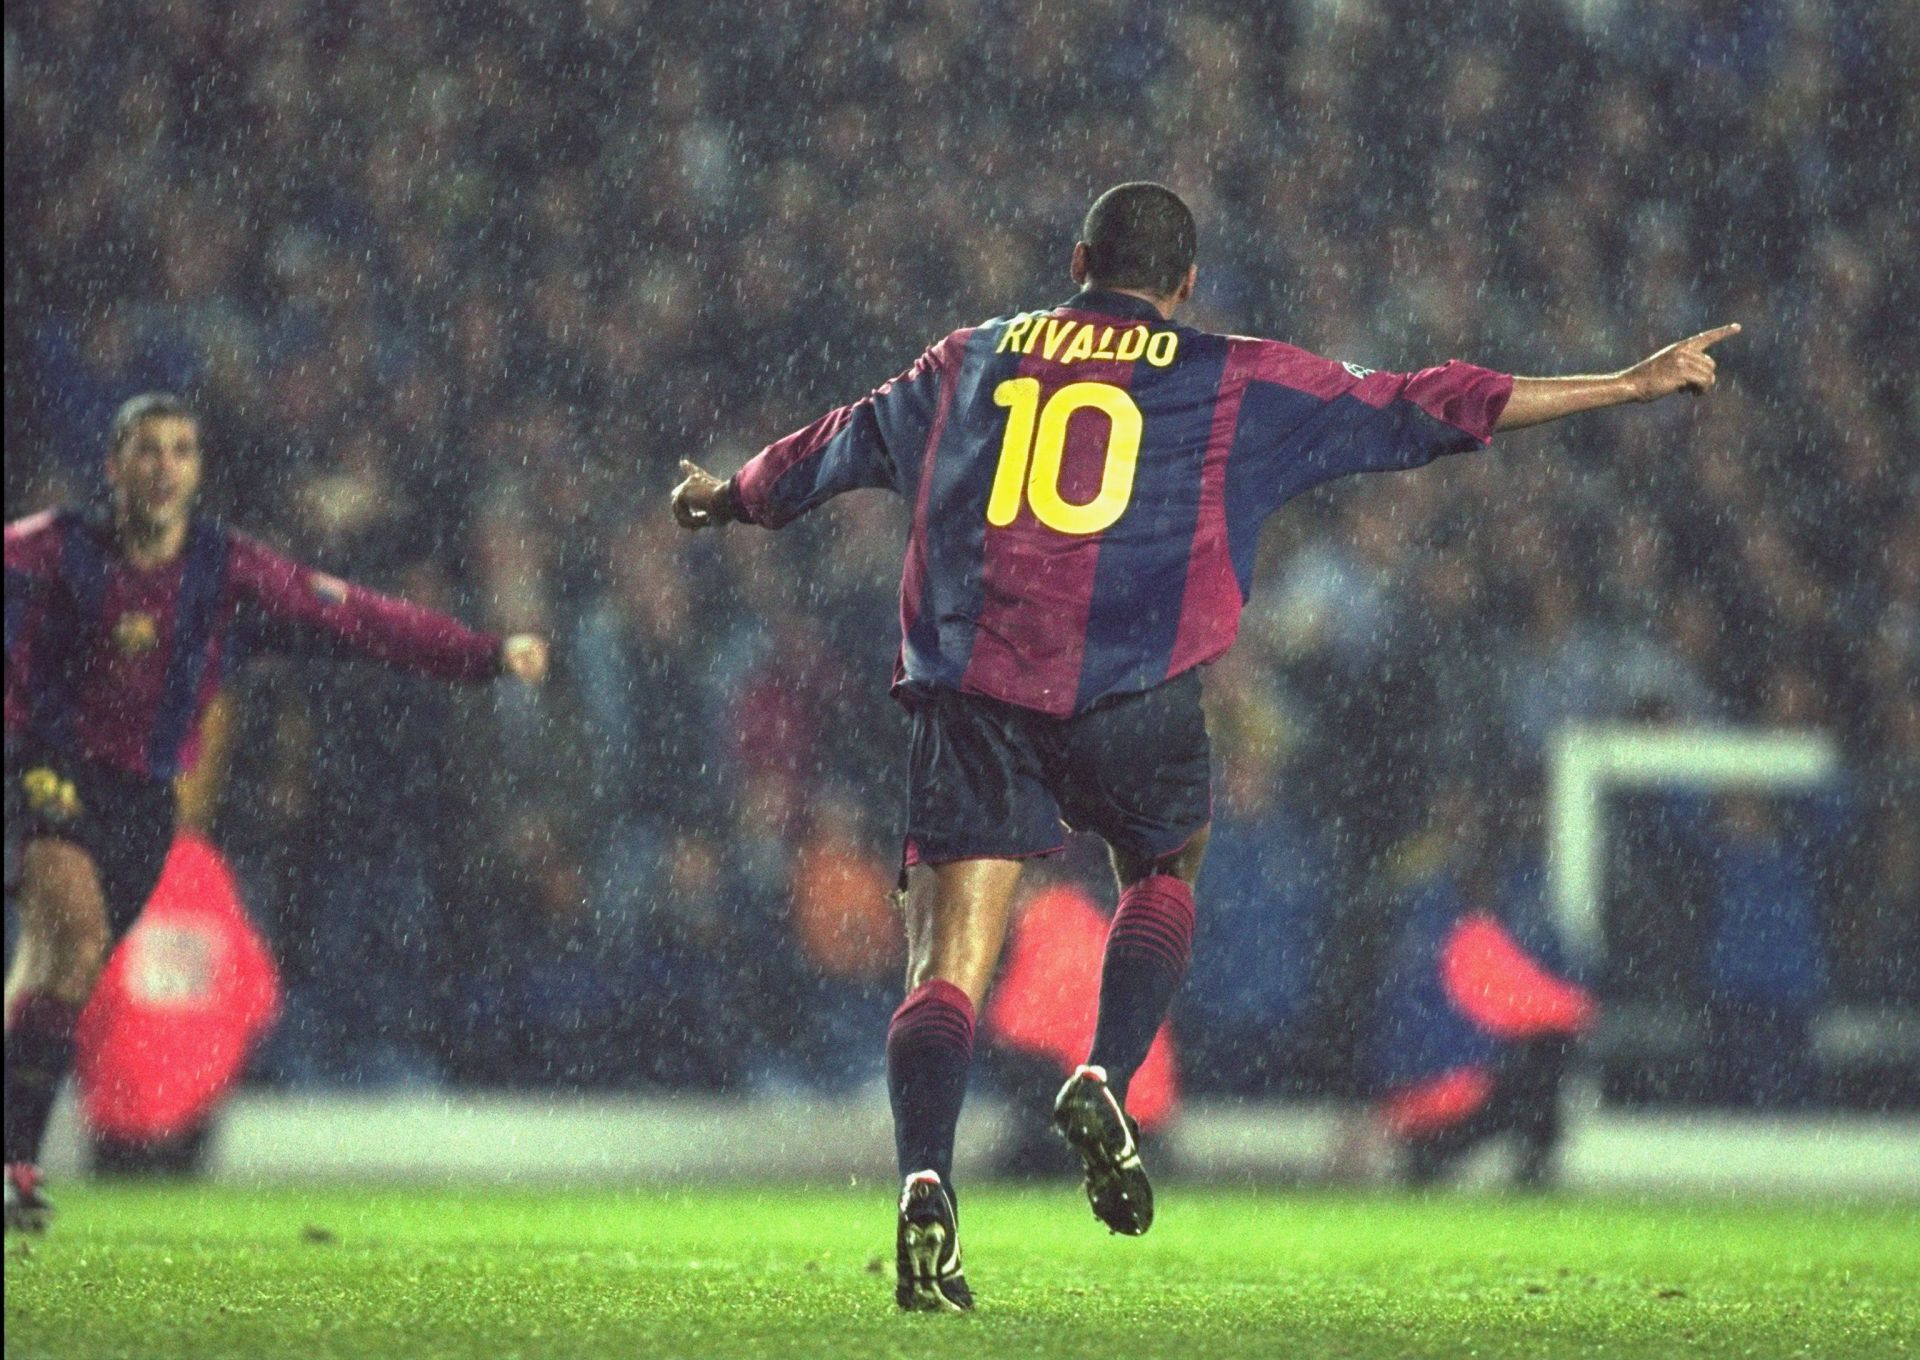 Rivaldo was one of the greatest Brazilians to ever play for the Spanish giants